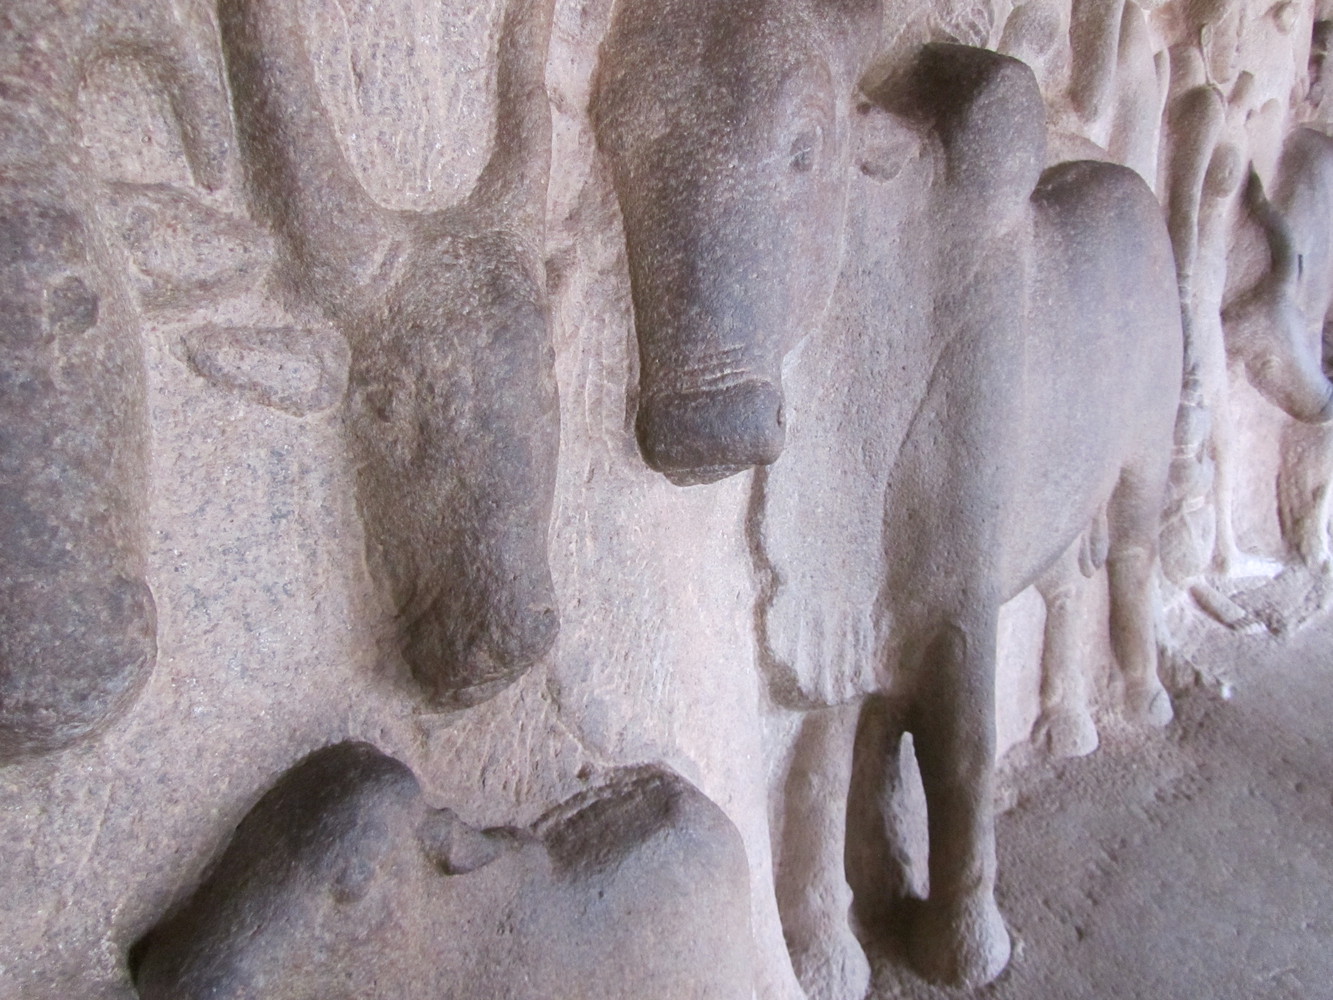 Sculpture of a cow at Krishna Cave Temple; the cow is sculpted mostly in bas-relief, however its left foreleg is sculpted in high-relief due to which a gap between the background and the left foreleg can be seen